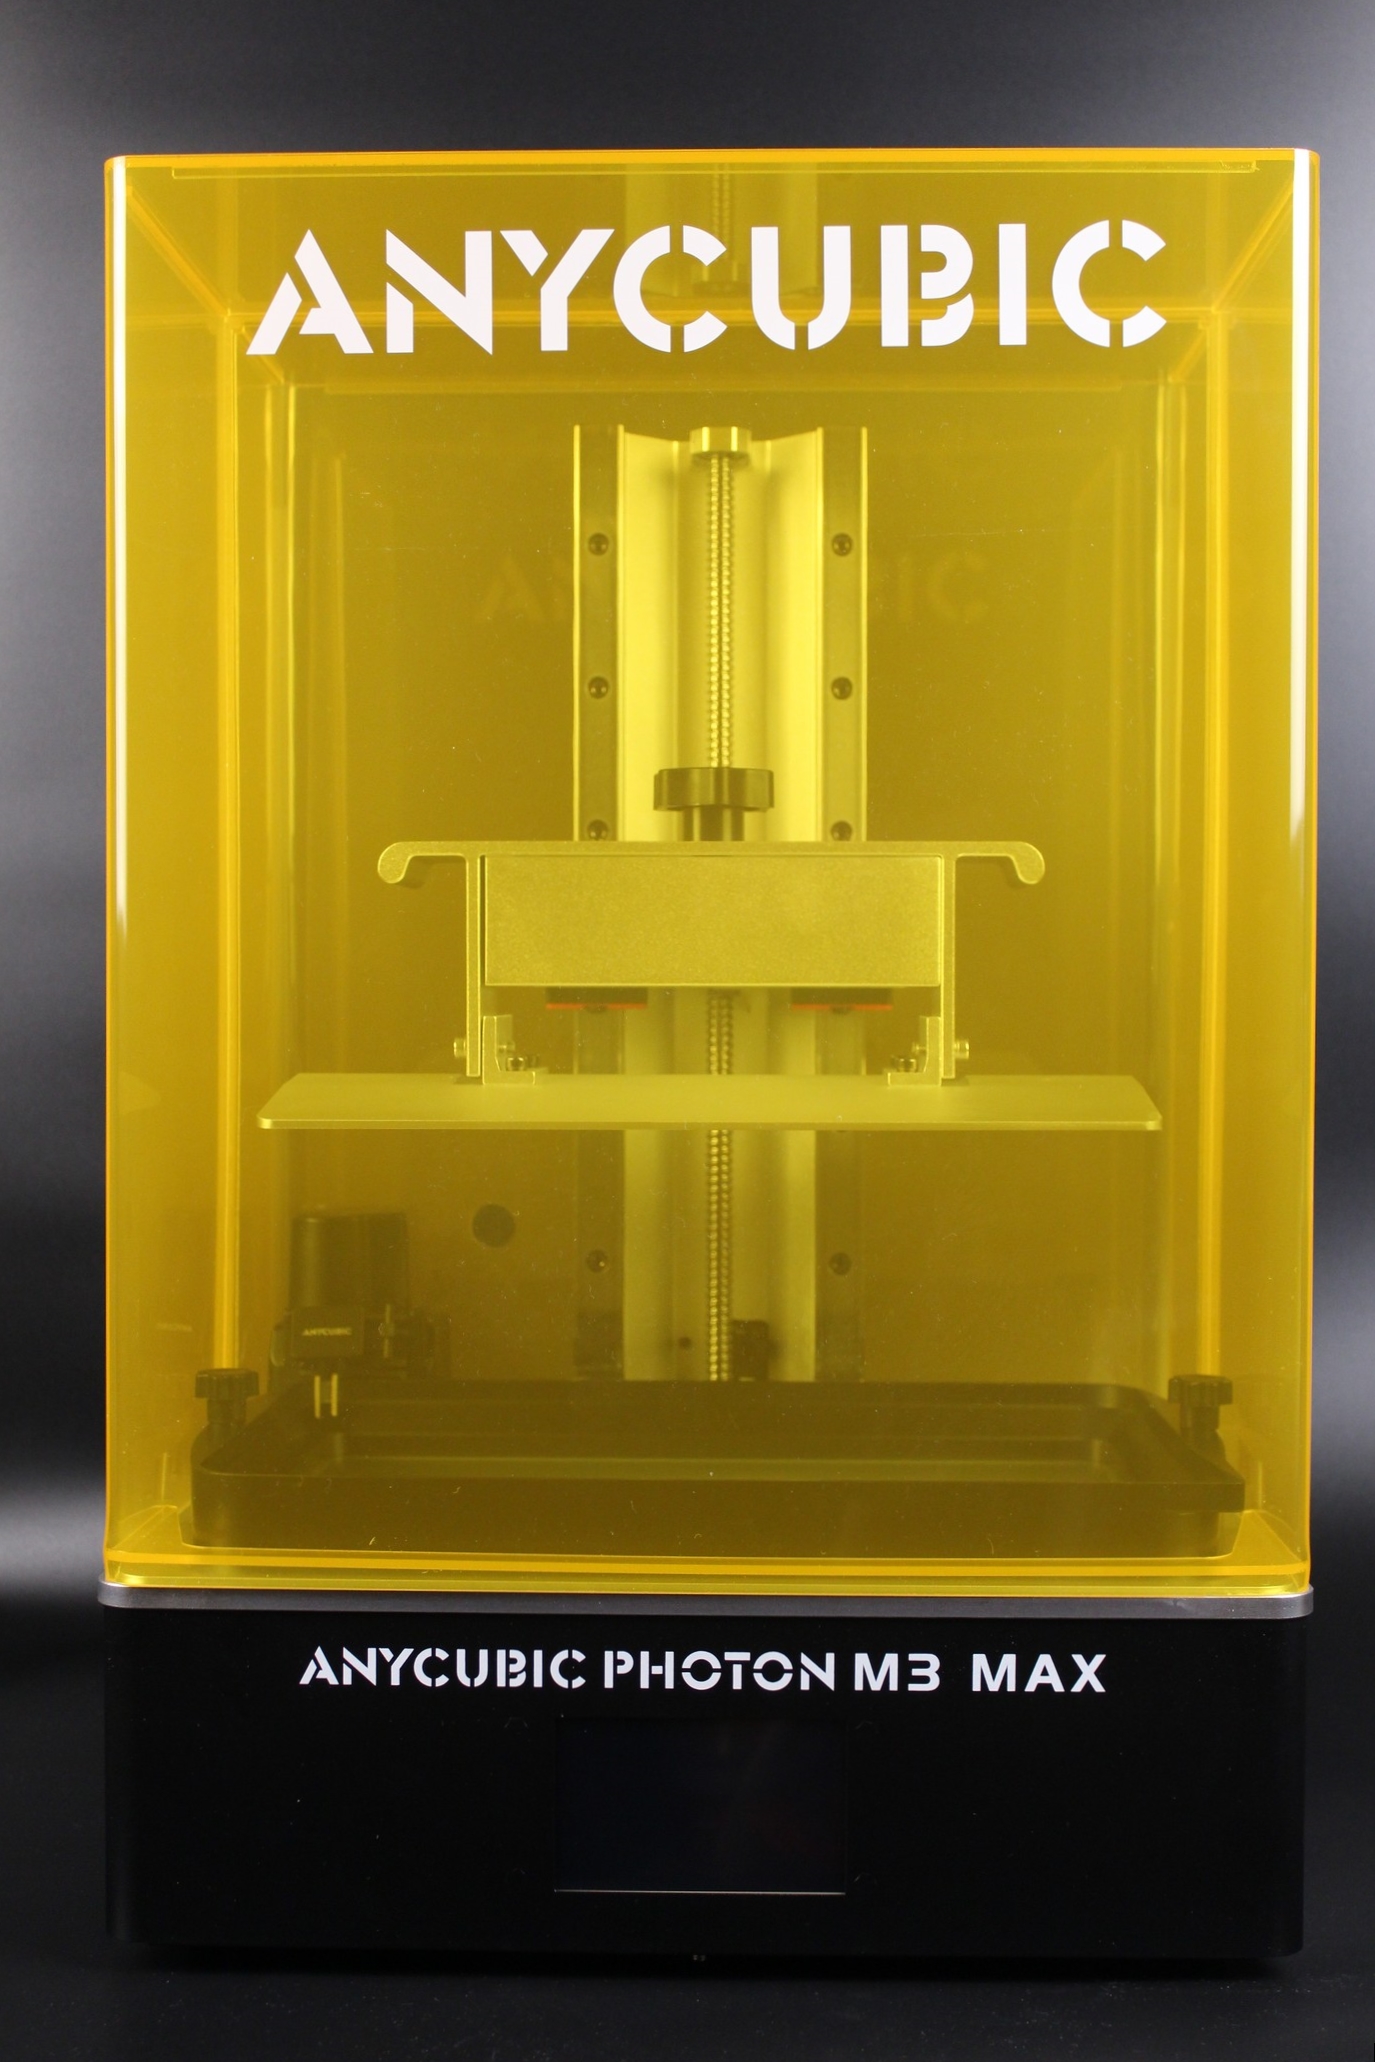 Anycubic Photon M3 Max Review Design 2 | Anycubic Photon M3 Max Review: Who Needs FDM Anymore?